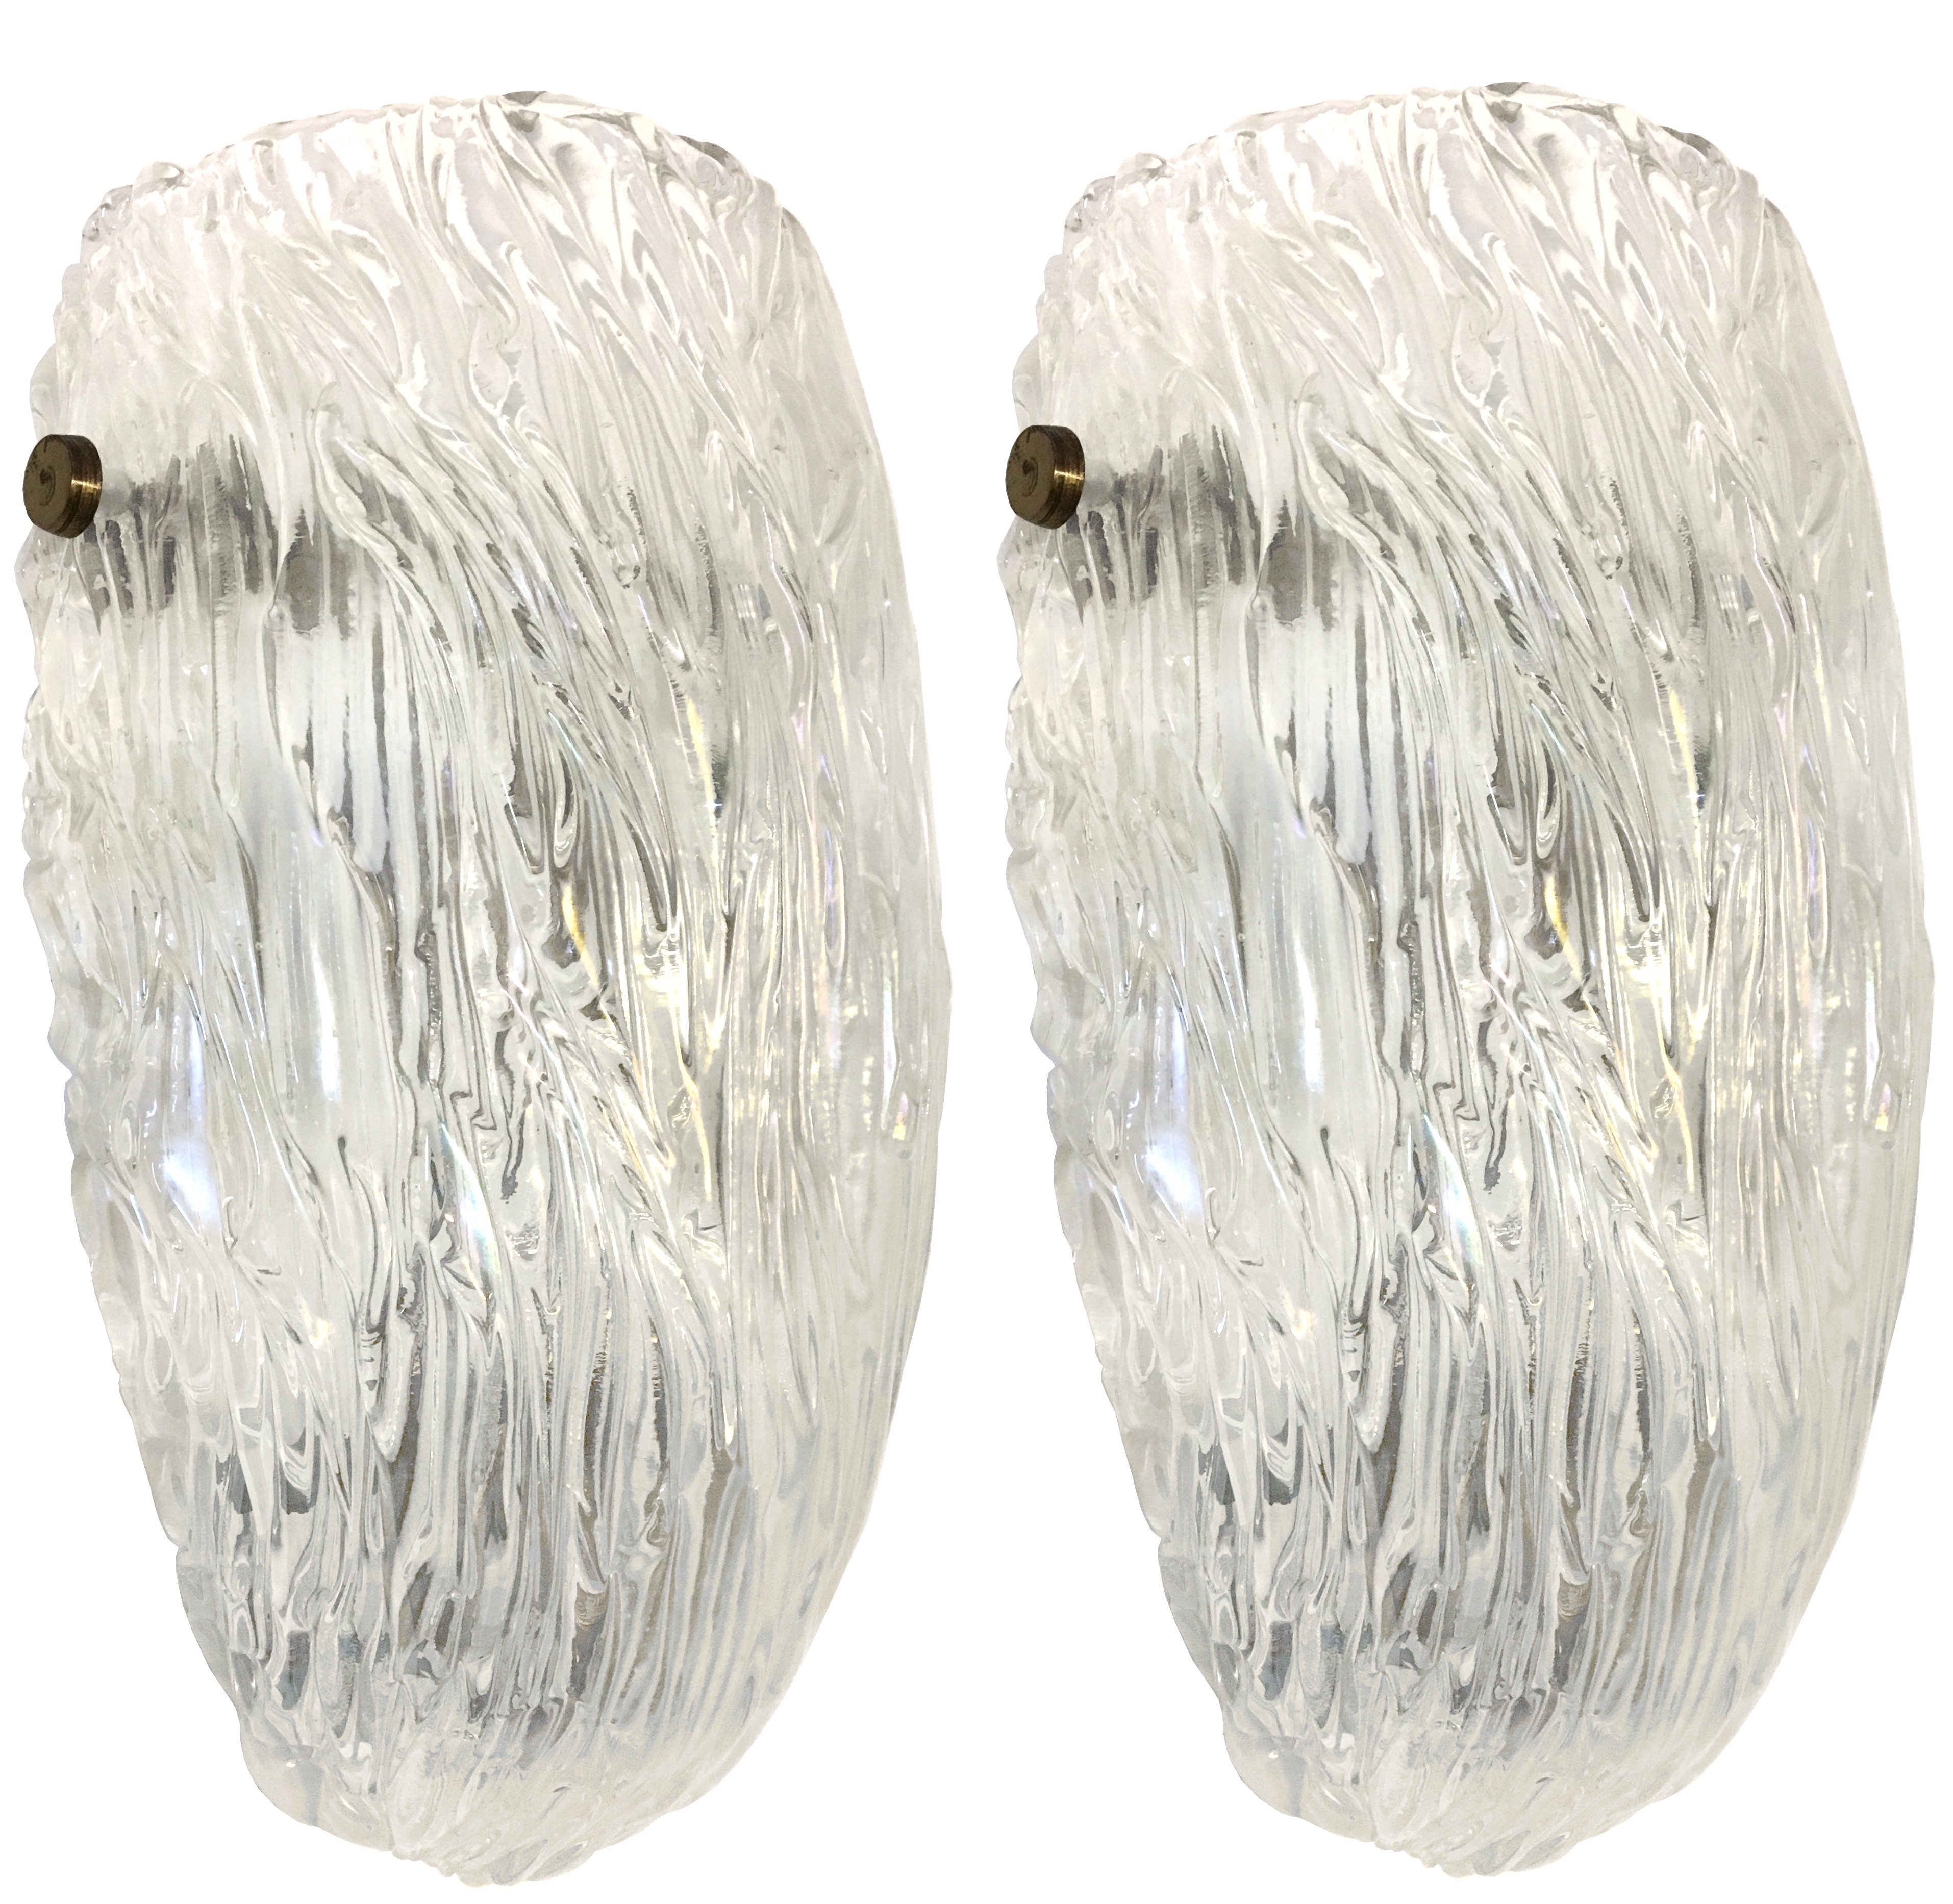 Pair of Textured Glass Sconces by Barovier (Three Sconces Available)